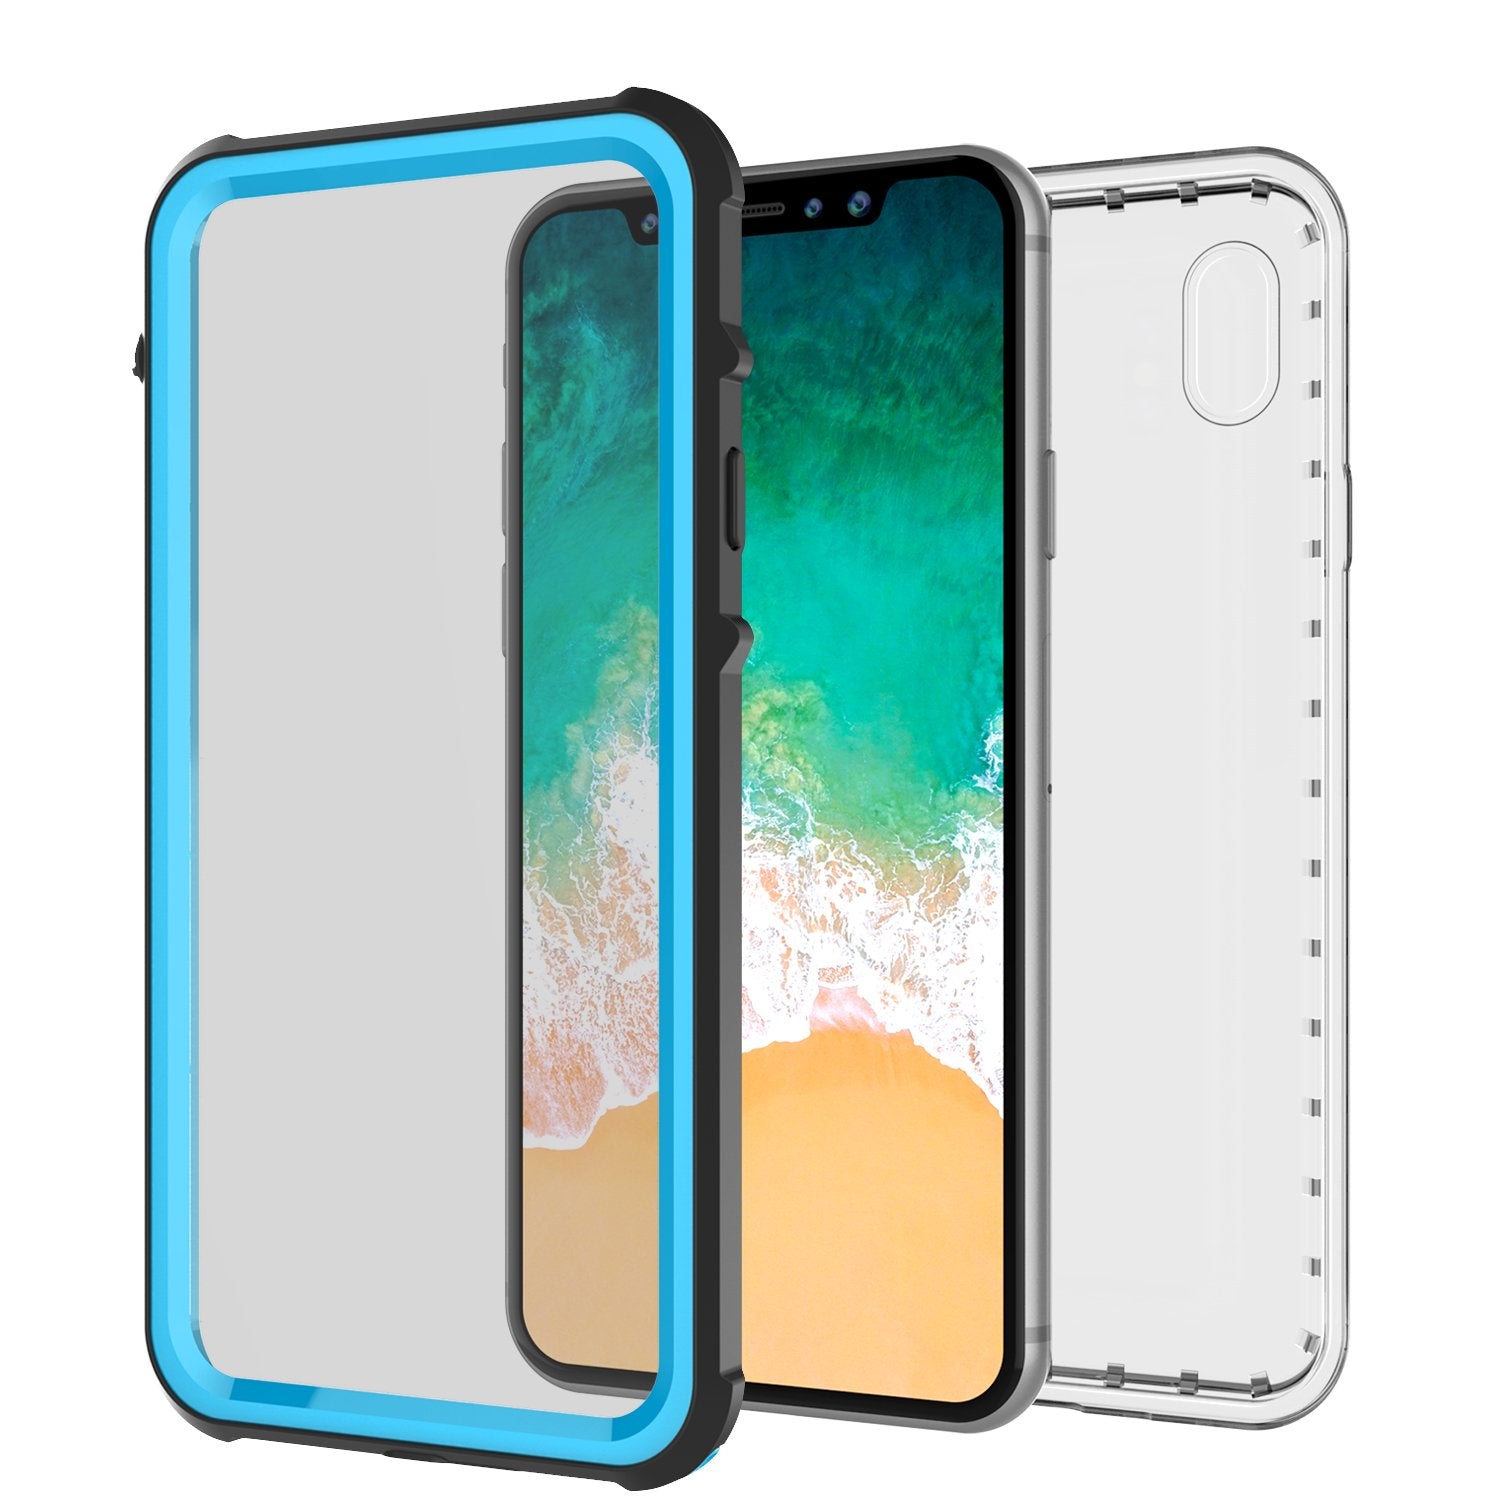 iPhone X Punkcase CRYSTAL SERIES Cover W/Screen Protector, Light blue